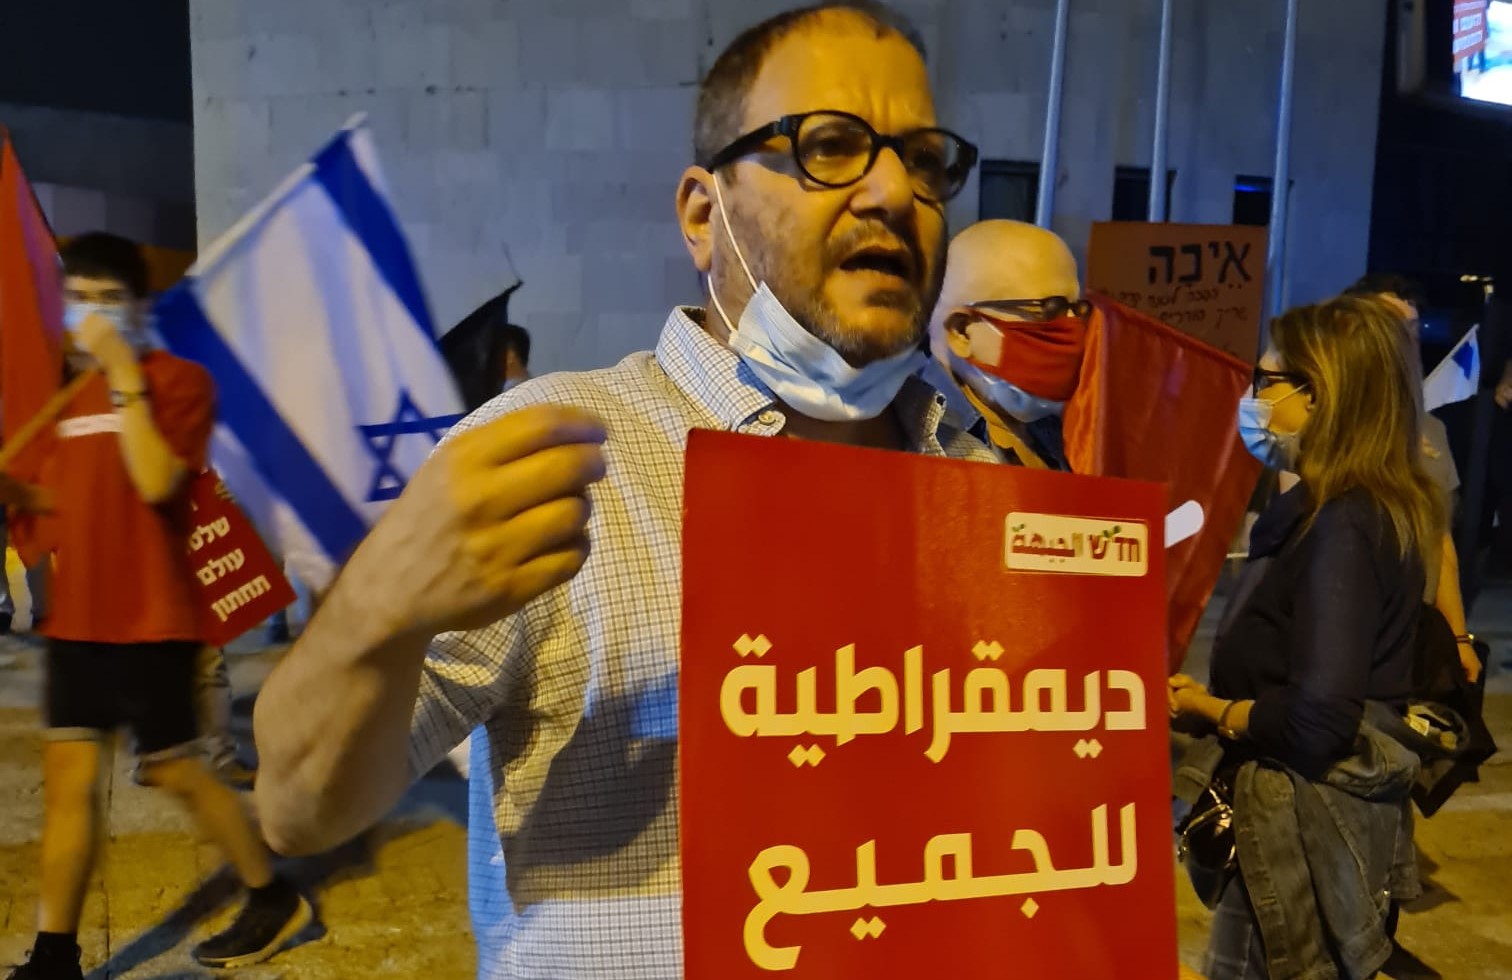 Hadash MK Ofer Cassif (Joint List) at the anti-Netanyahu protest held in Holon, south of Tel Aviv, on Saturday evening, November 7. The Hadash sign reads in Arabic: "Democracy for All."